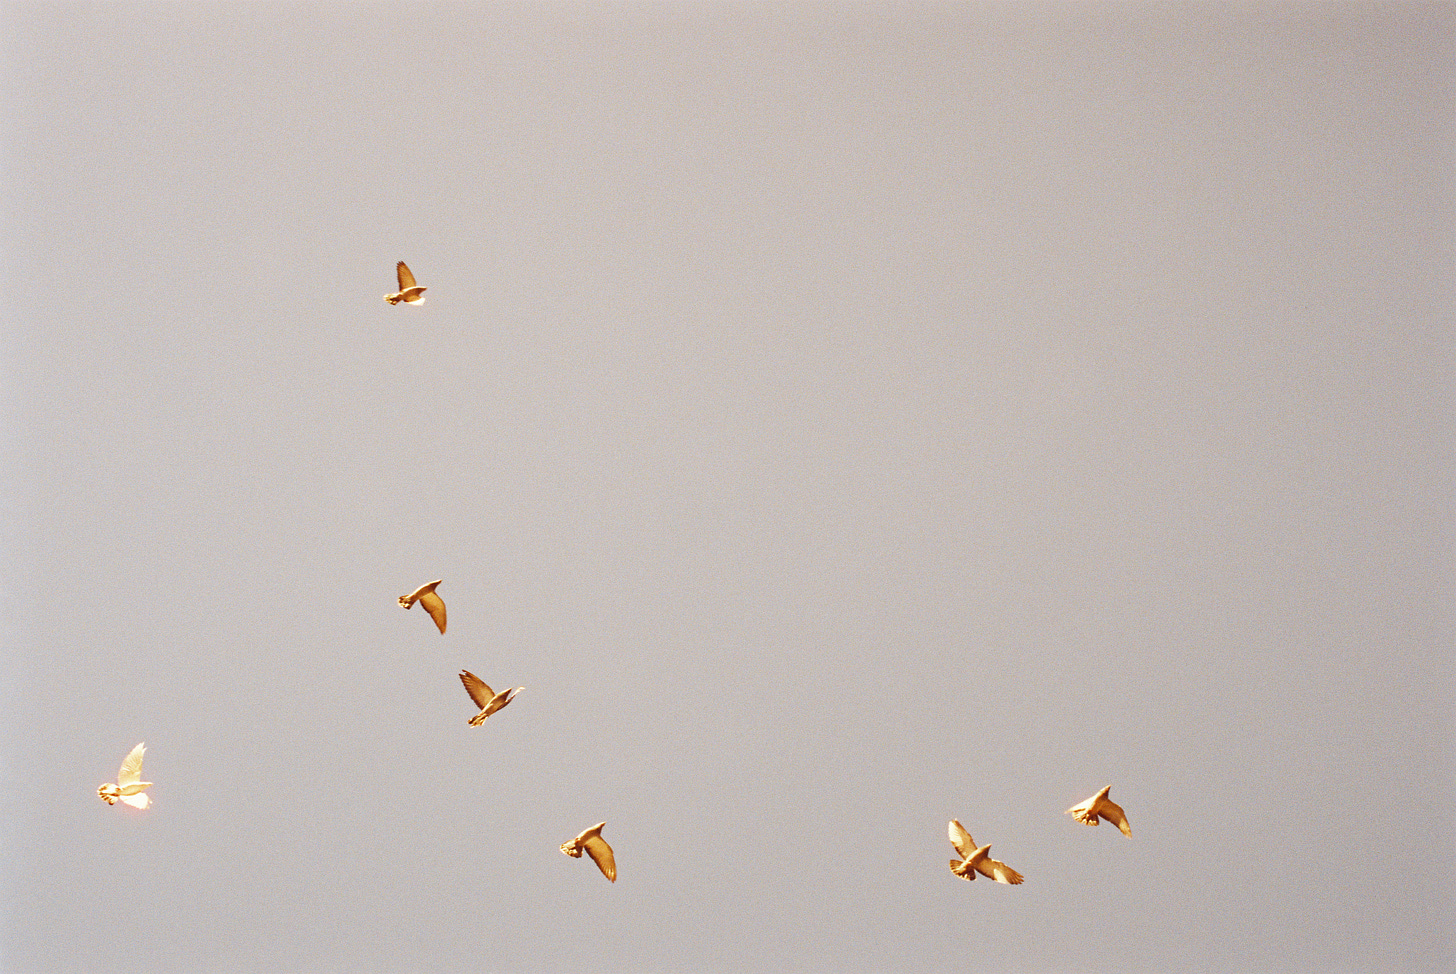 A photograph of a group of pigeons in flight.